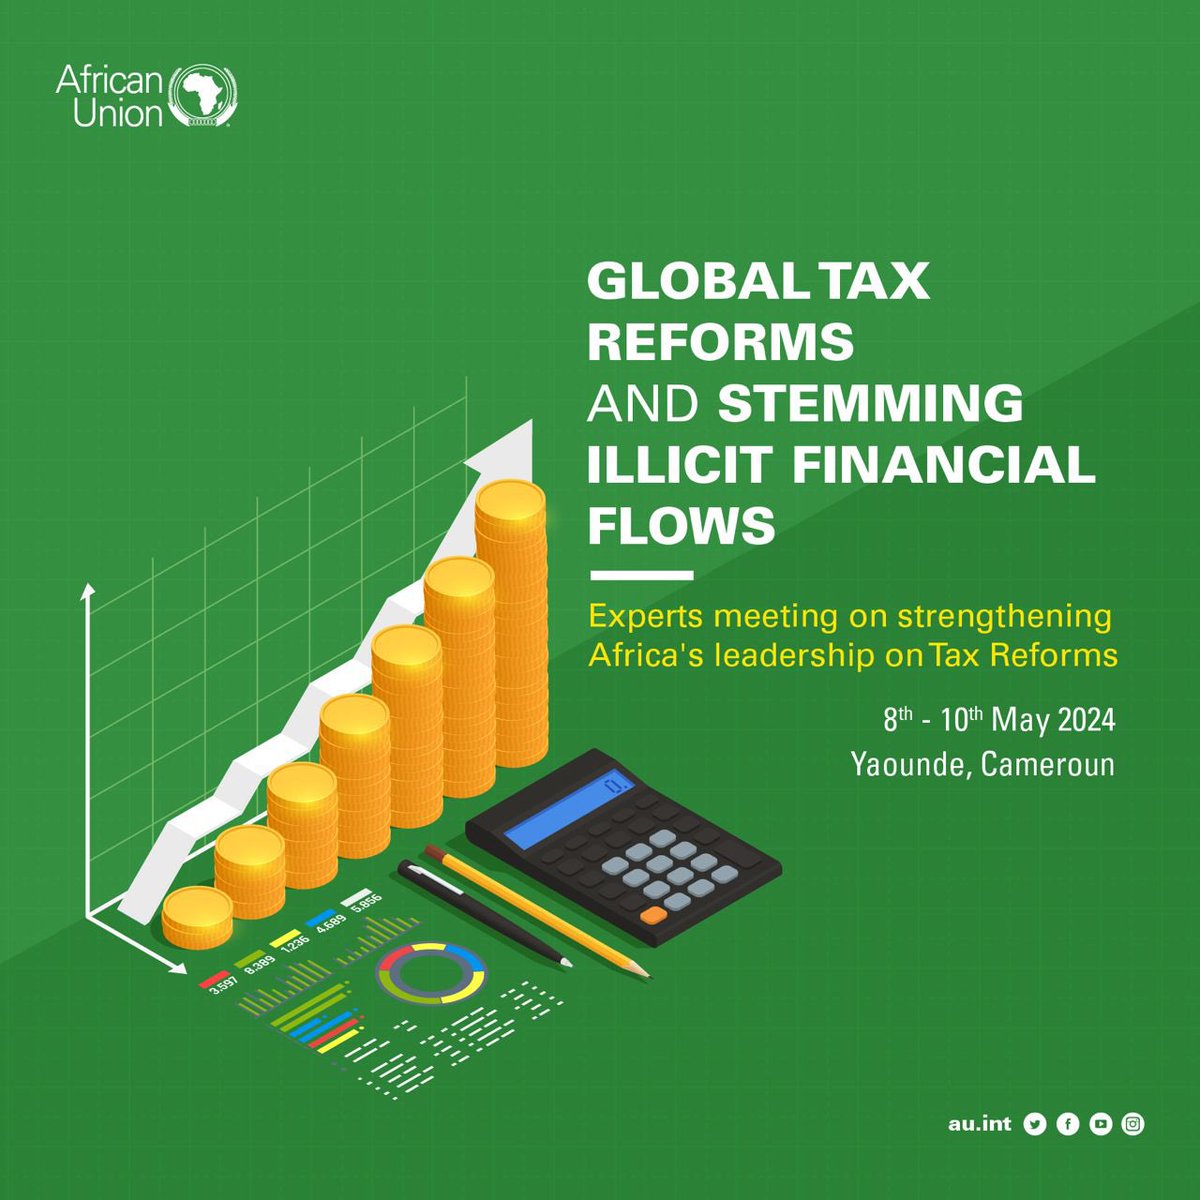 Africa loses $89B annually to illicit financial flows, equating to 3.7% of its GDP. Tax incentives contribute to a further $220B loss. These challenges require concerted efforts to promote fiscal transparency & efficiency in tax administration. Brief ♾️au.int/en/newsevents/…